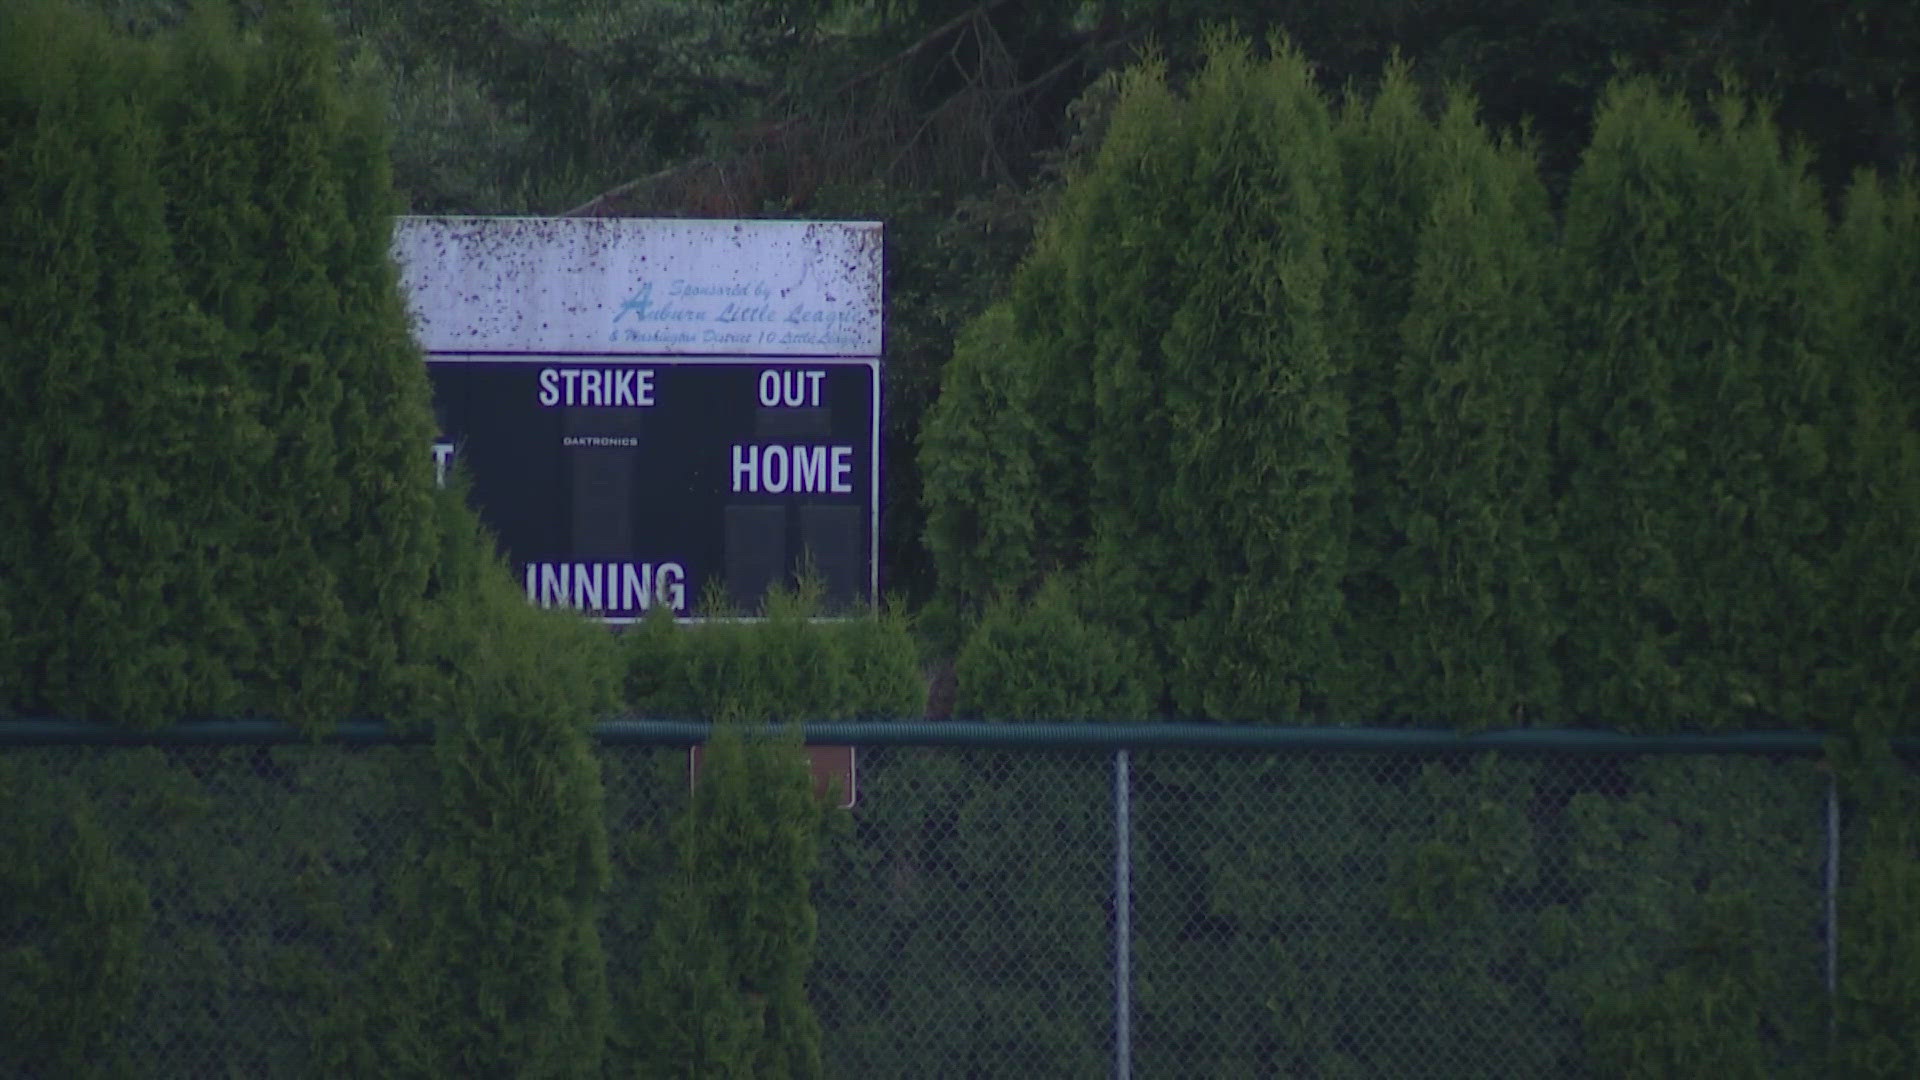 Two people were shot at Isaac Evans Park the night of May 19, just a few miles from a ball field where youth teams were playing.